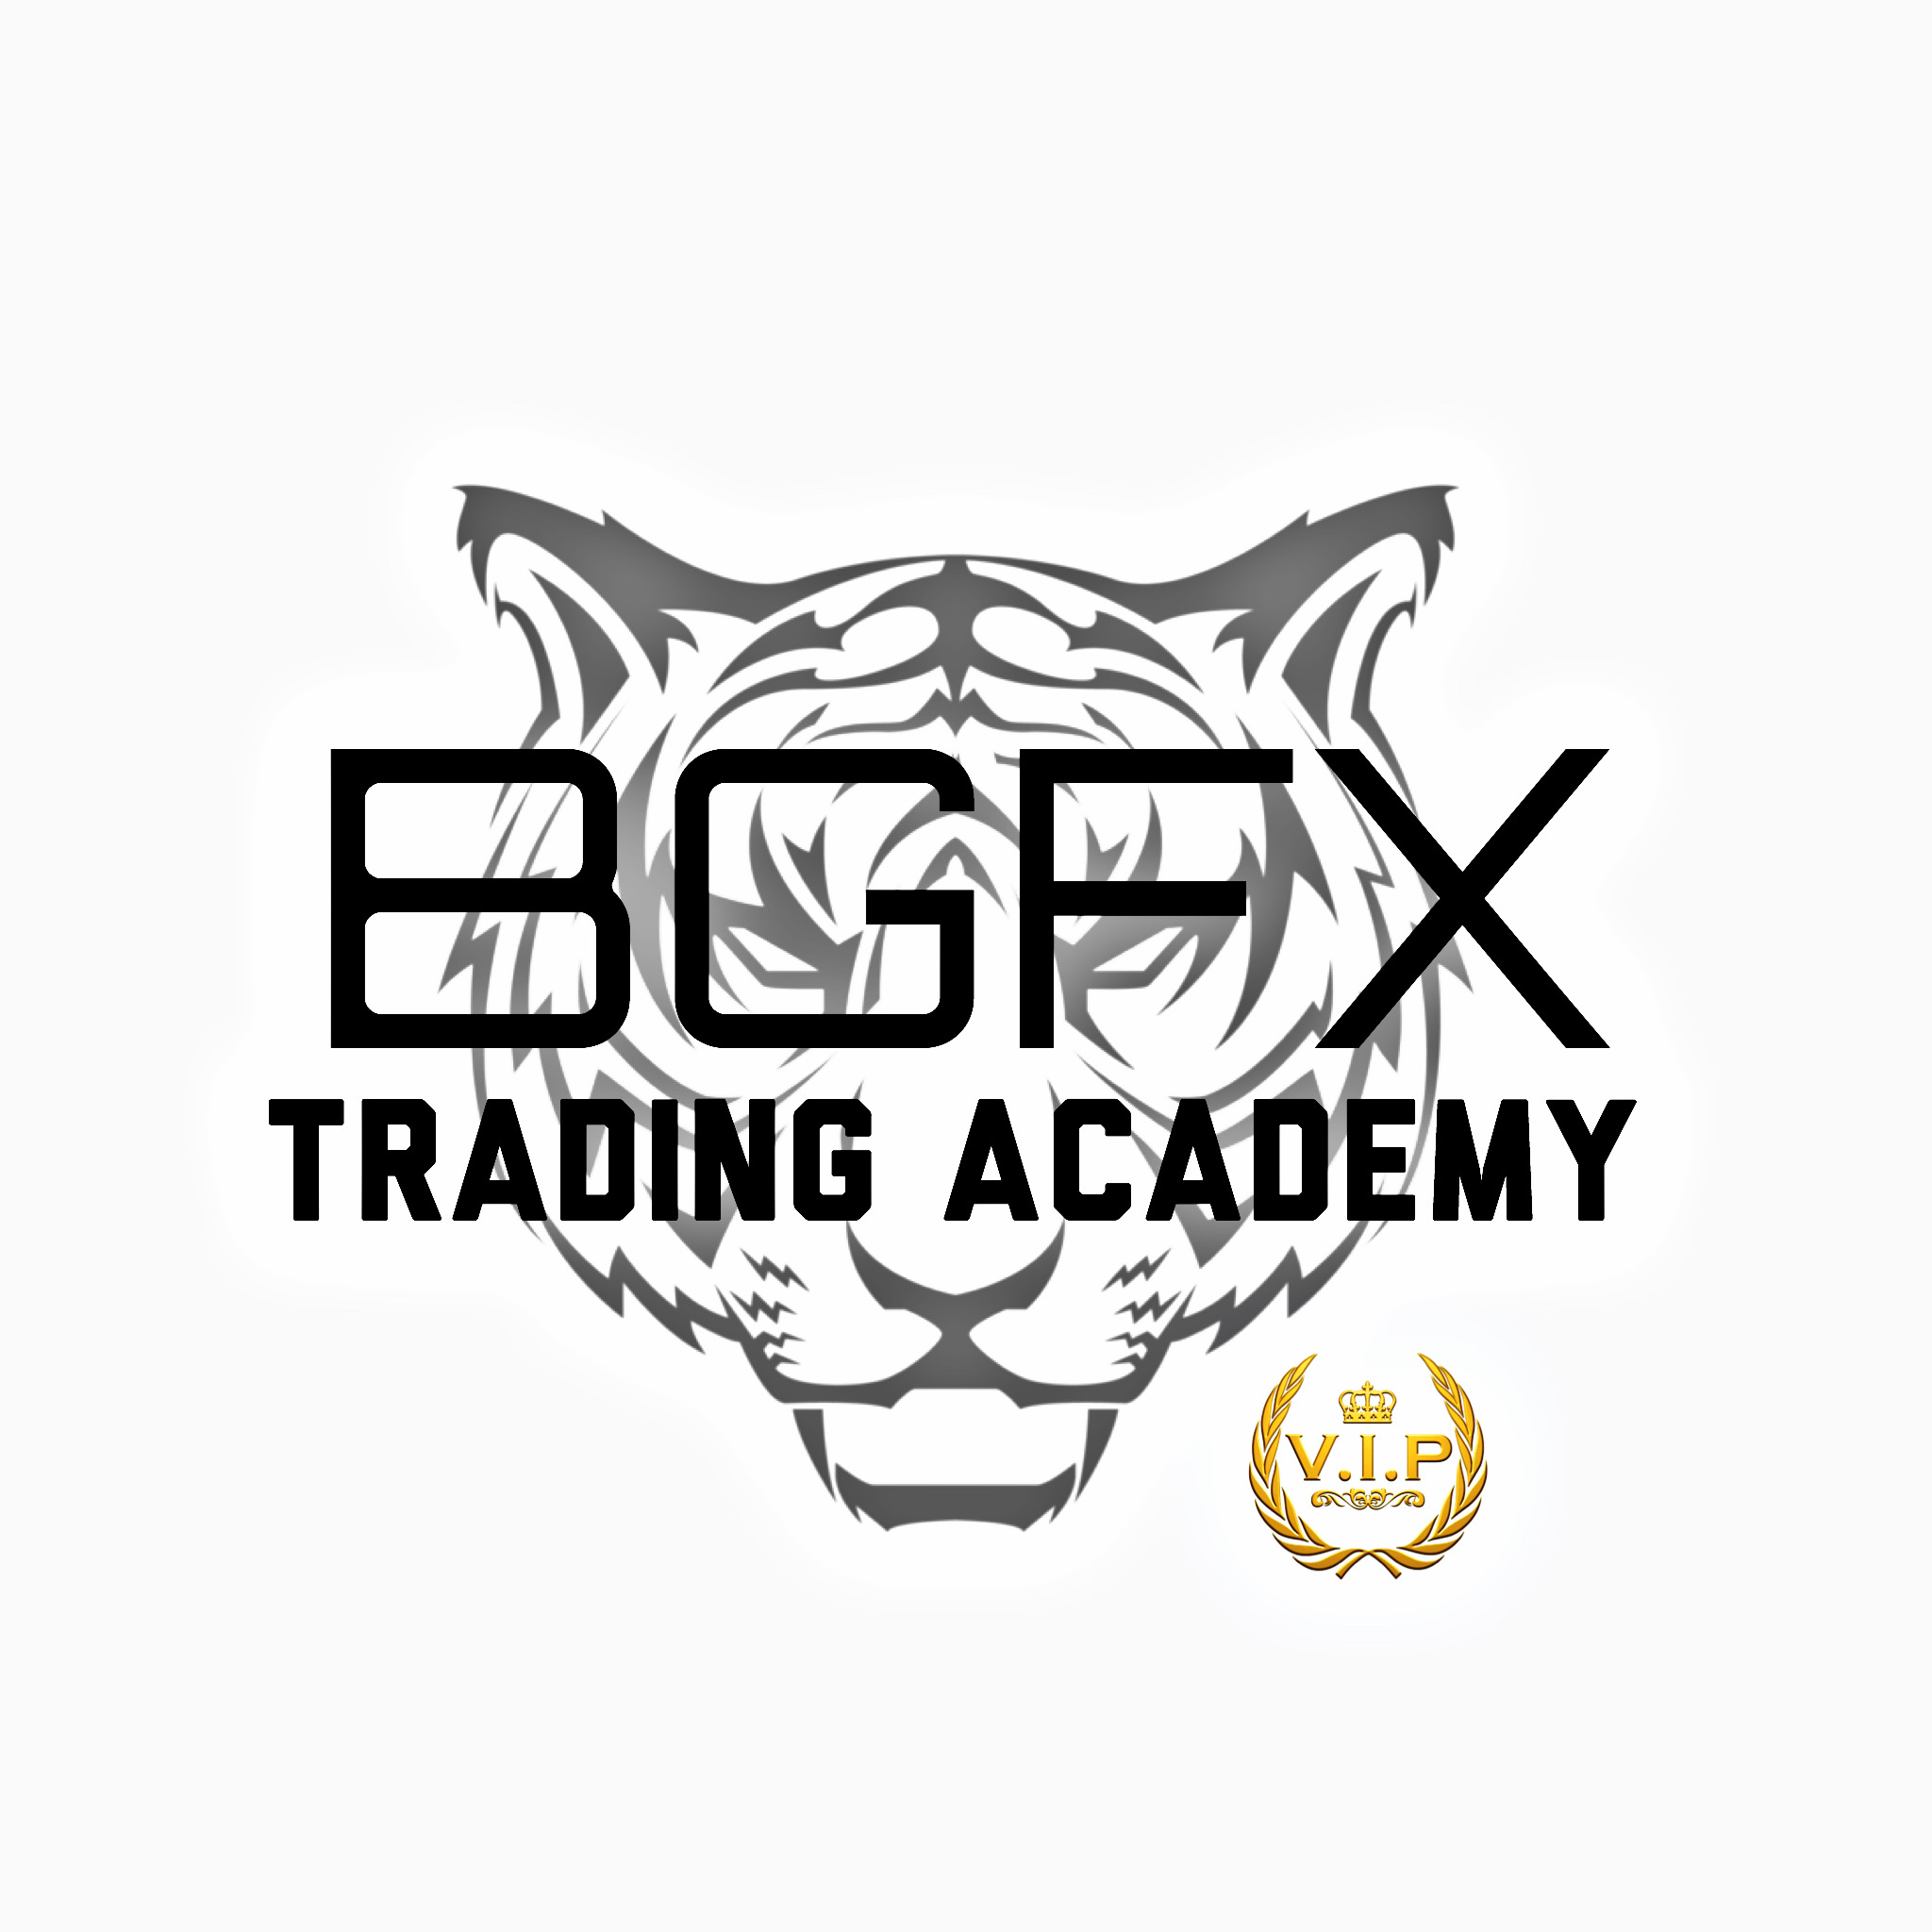 [GET] BGFX Trading Academy Free Download